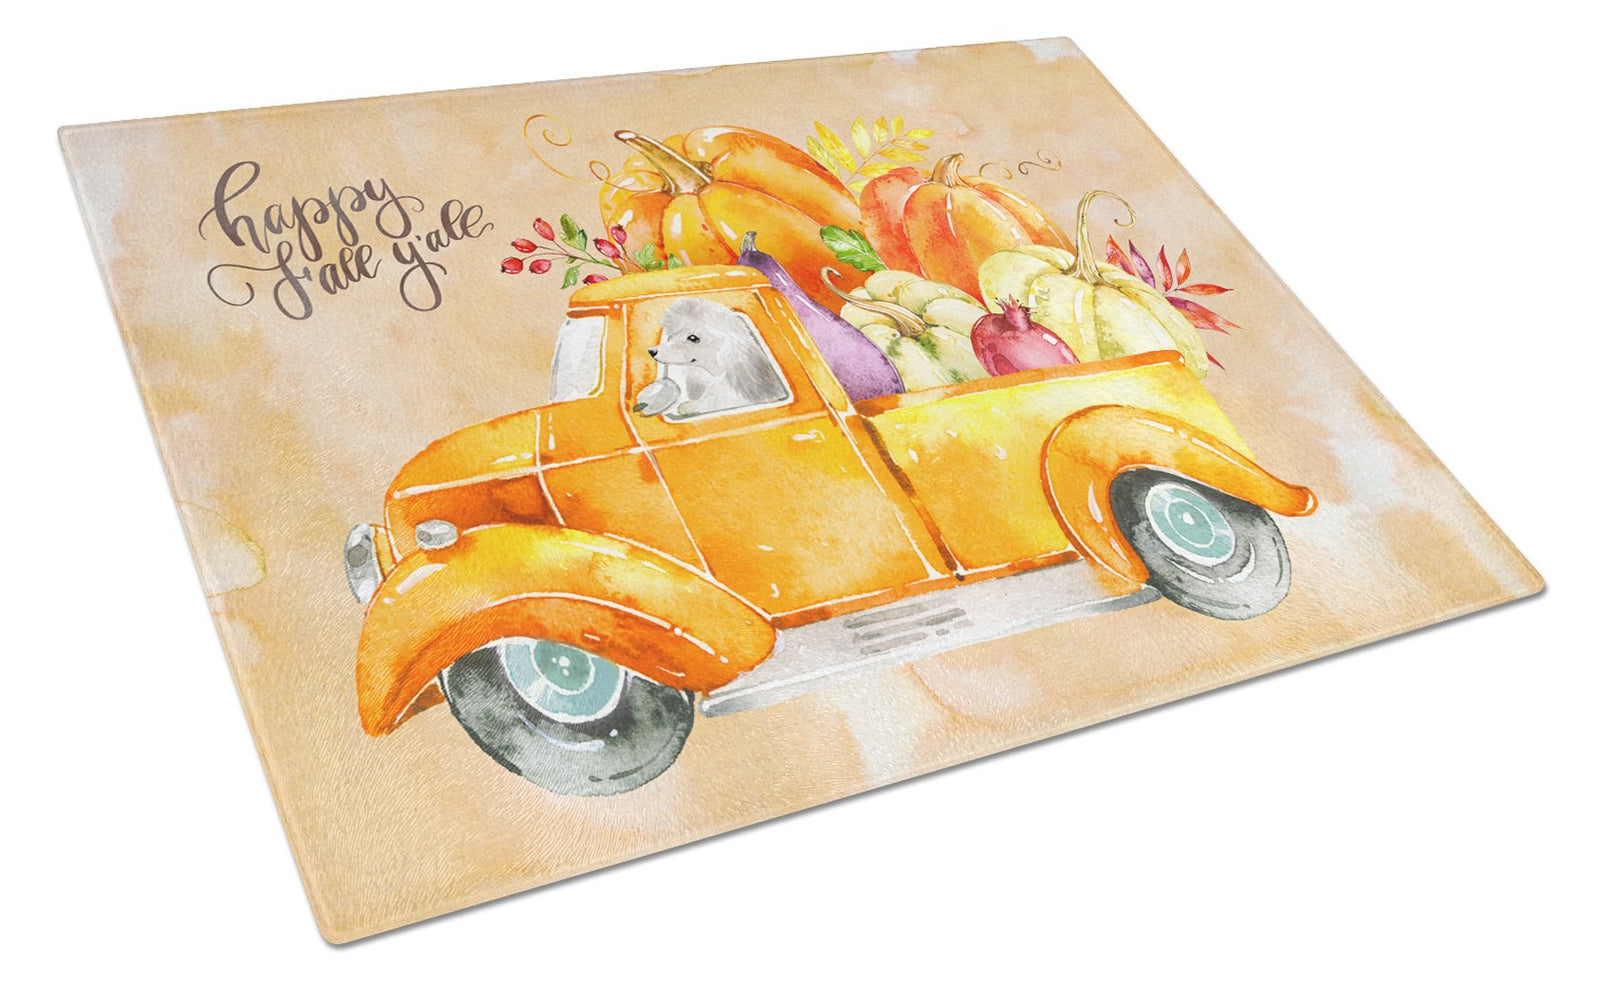 Fall Harvest White Poodle Glass Cutting Board Large CK2678LCB by Caroline's Treasures